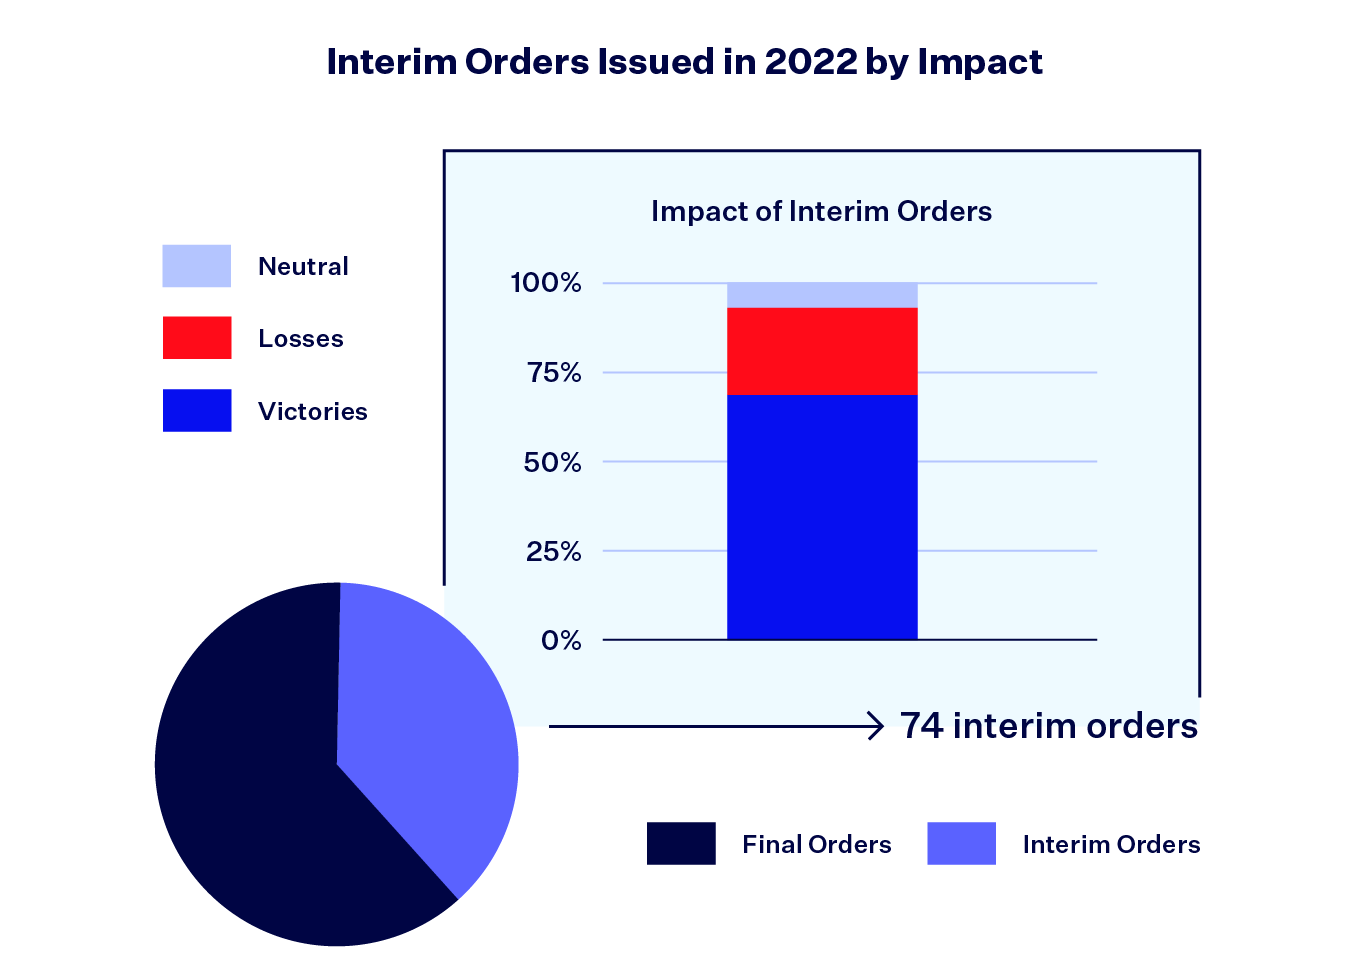 Graphic titled "Interim Orders Issued in 2022 by Impact." The graphic shows the unlabelled pie chart from the previous graphic. The 74 interim orders have their own stacked bar graph showing the percentage of orders that were Neutral, Losses, and Victories. Close to 70% were Victories.